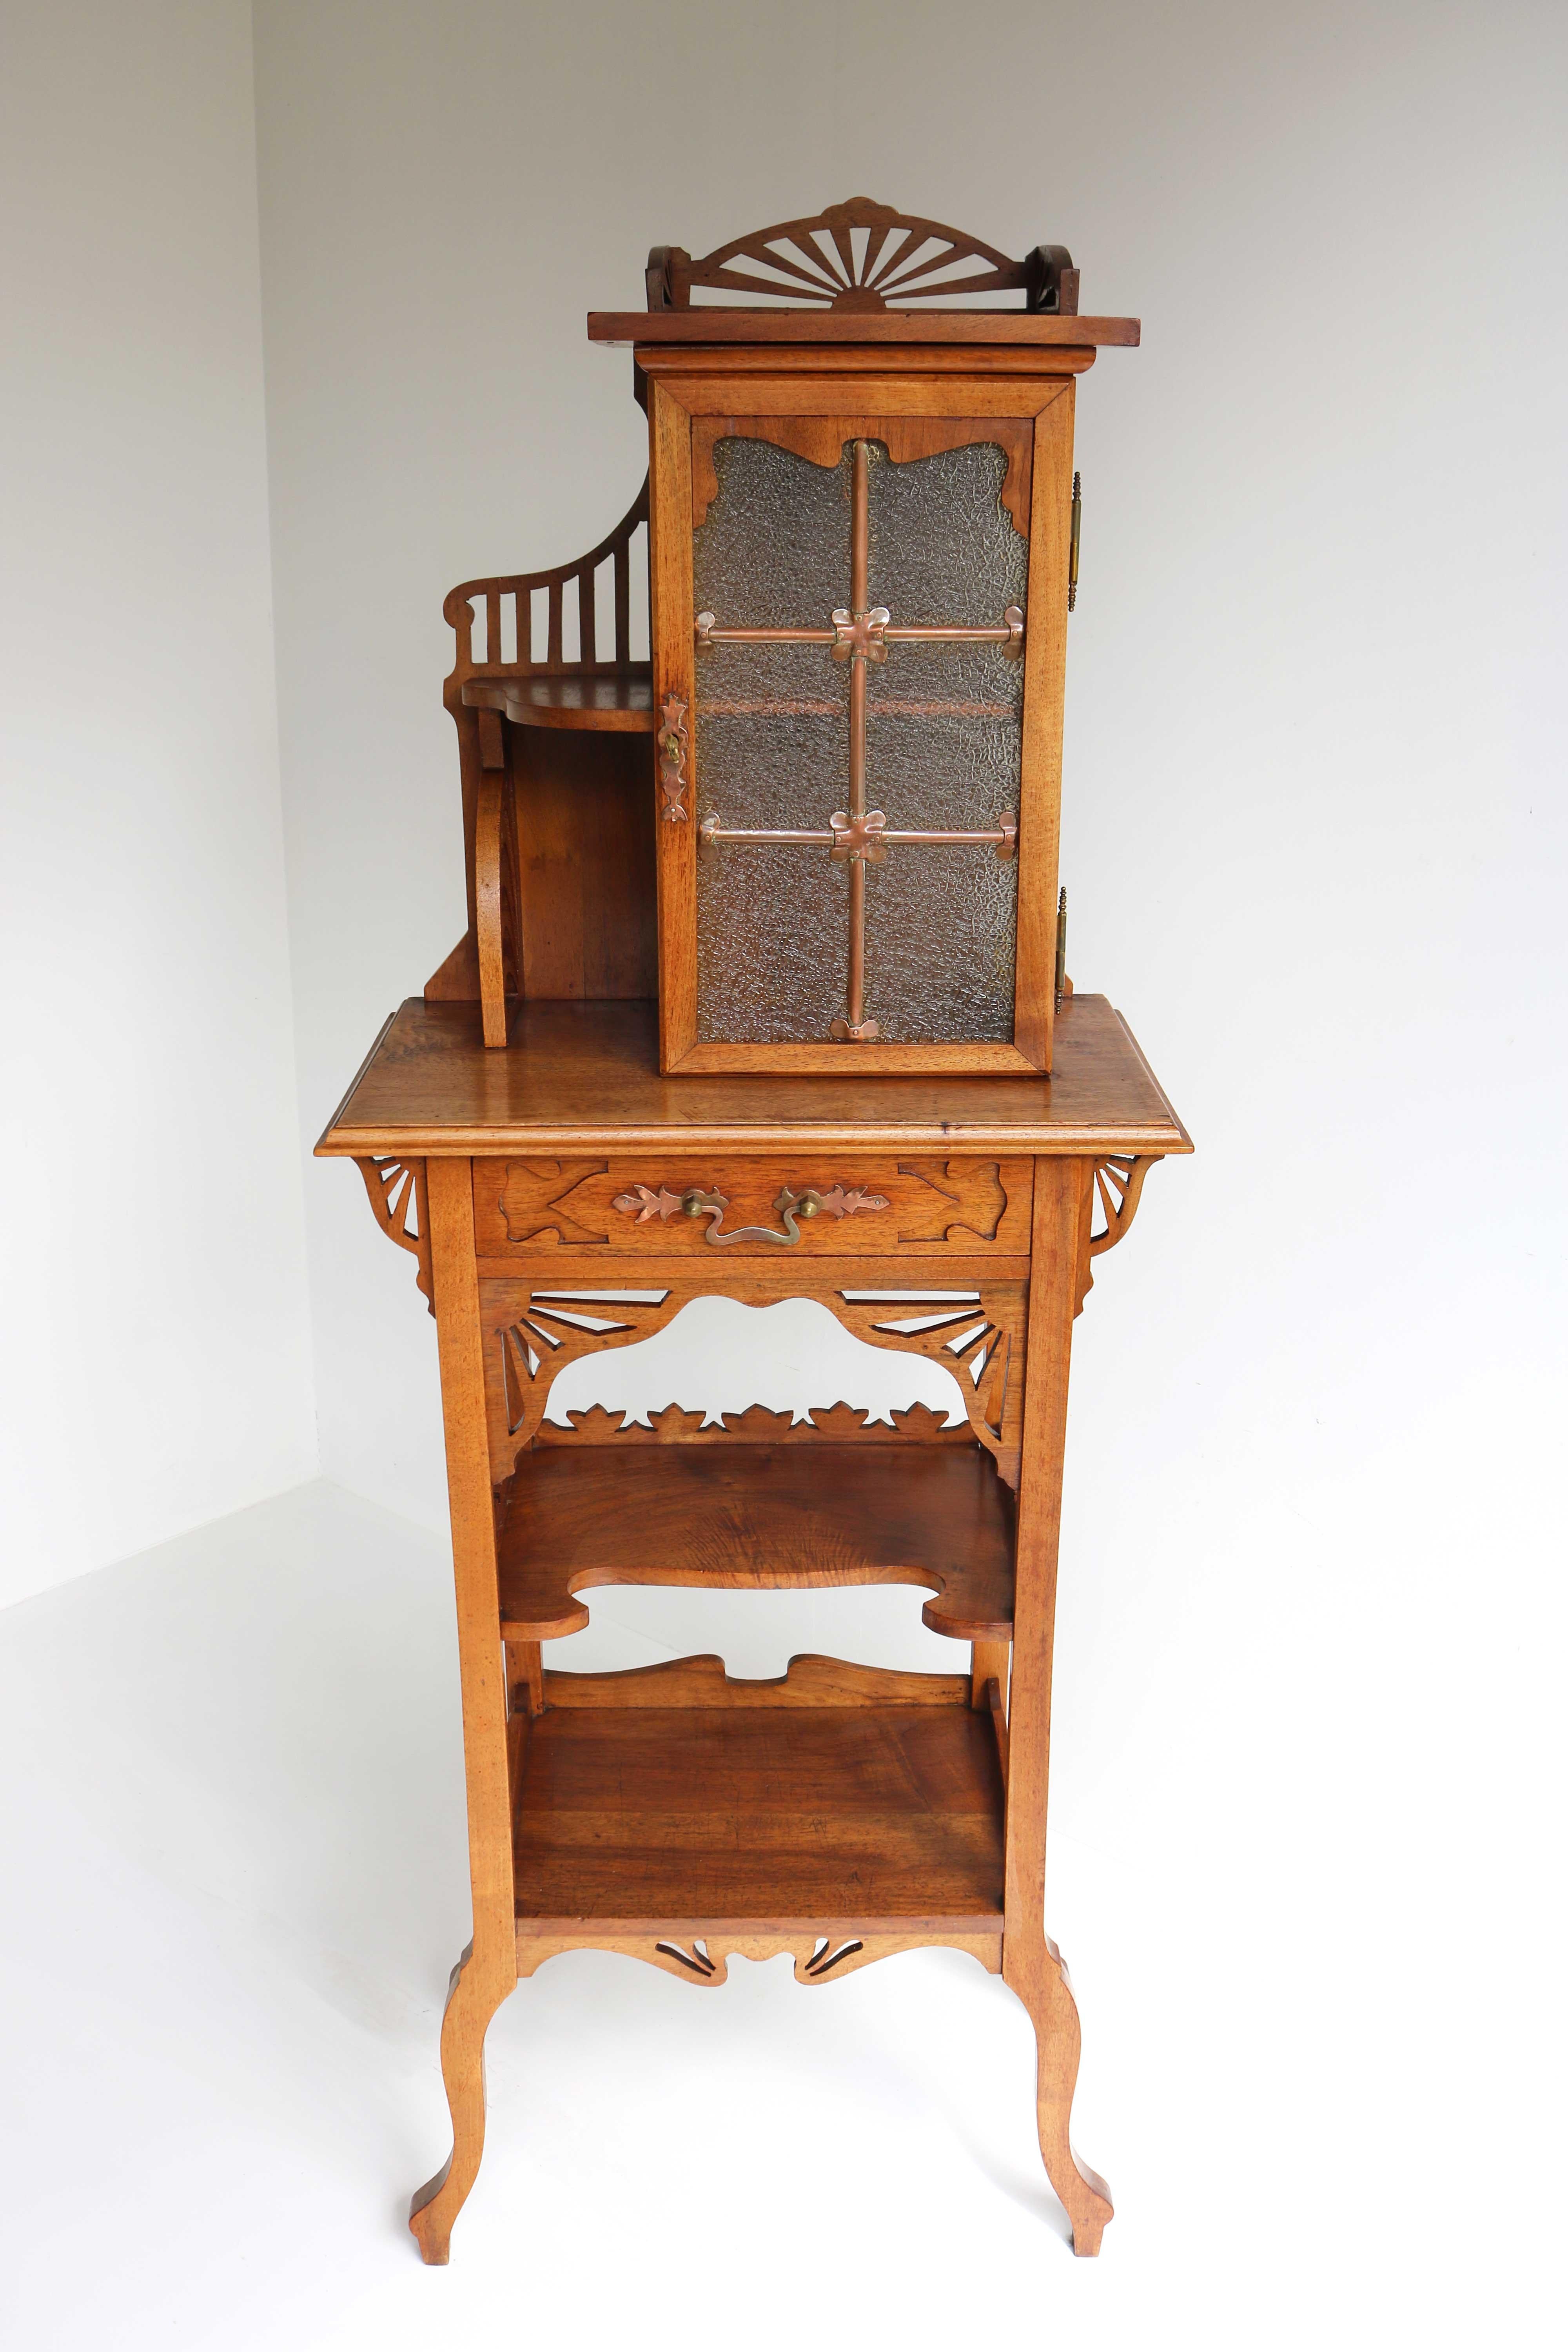 This wonderful lovely piece of furniture is a true eye catcher in an Arts & Crafts or Art Nouveau home! 
Unusual rare small cabinet c.1900- 1910. Rare because of its size and quality!
Versatile furniture that can be used in different areas of your